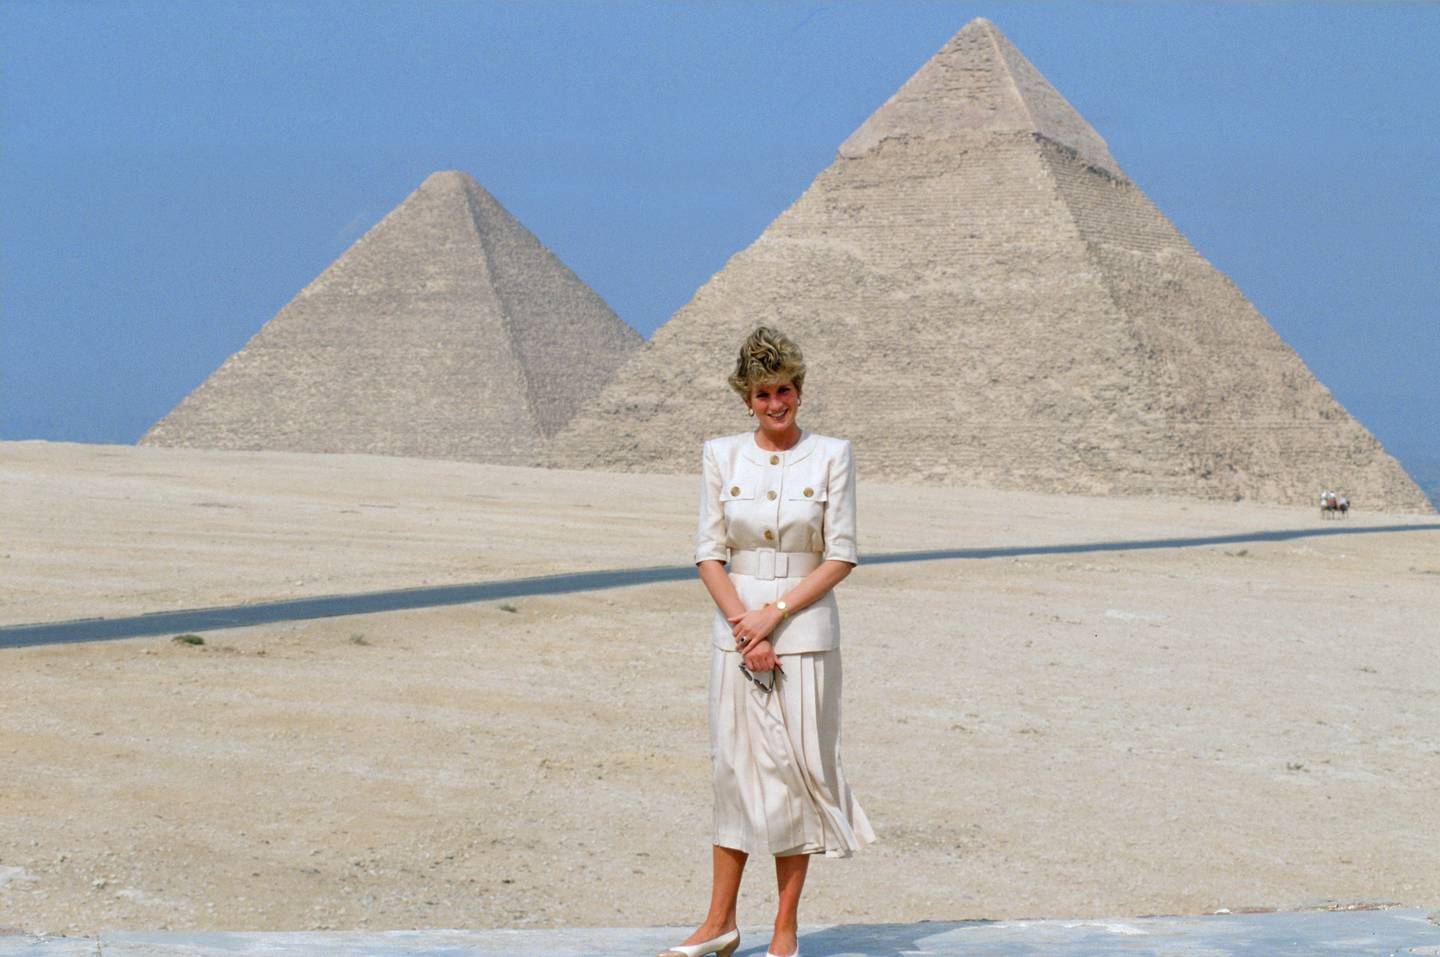 EGYPT - MAY 12:  Diana, Princess of Wales visits the Pyramids in Giza during an official tour of Egypt  (Photo by Tim Graham/Getty Images)